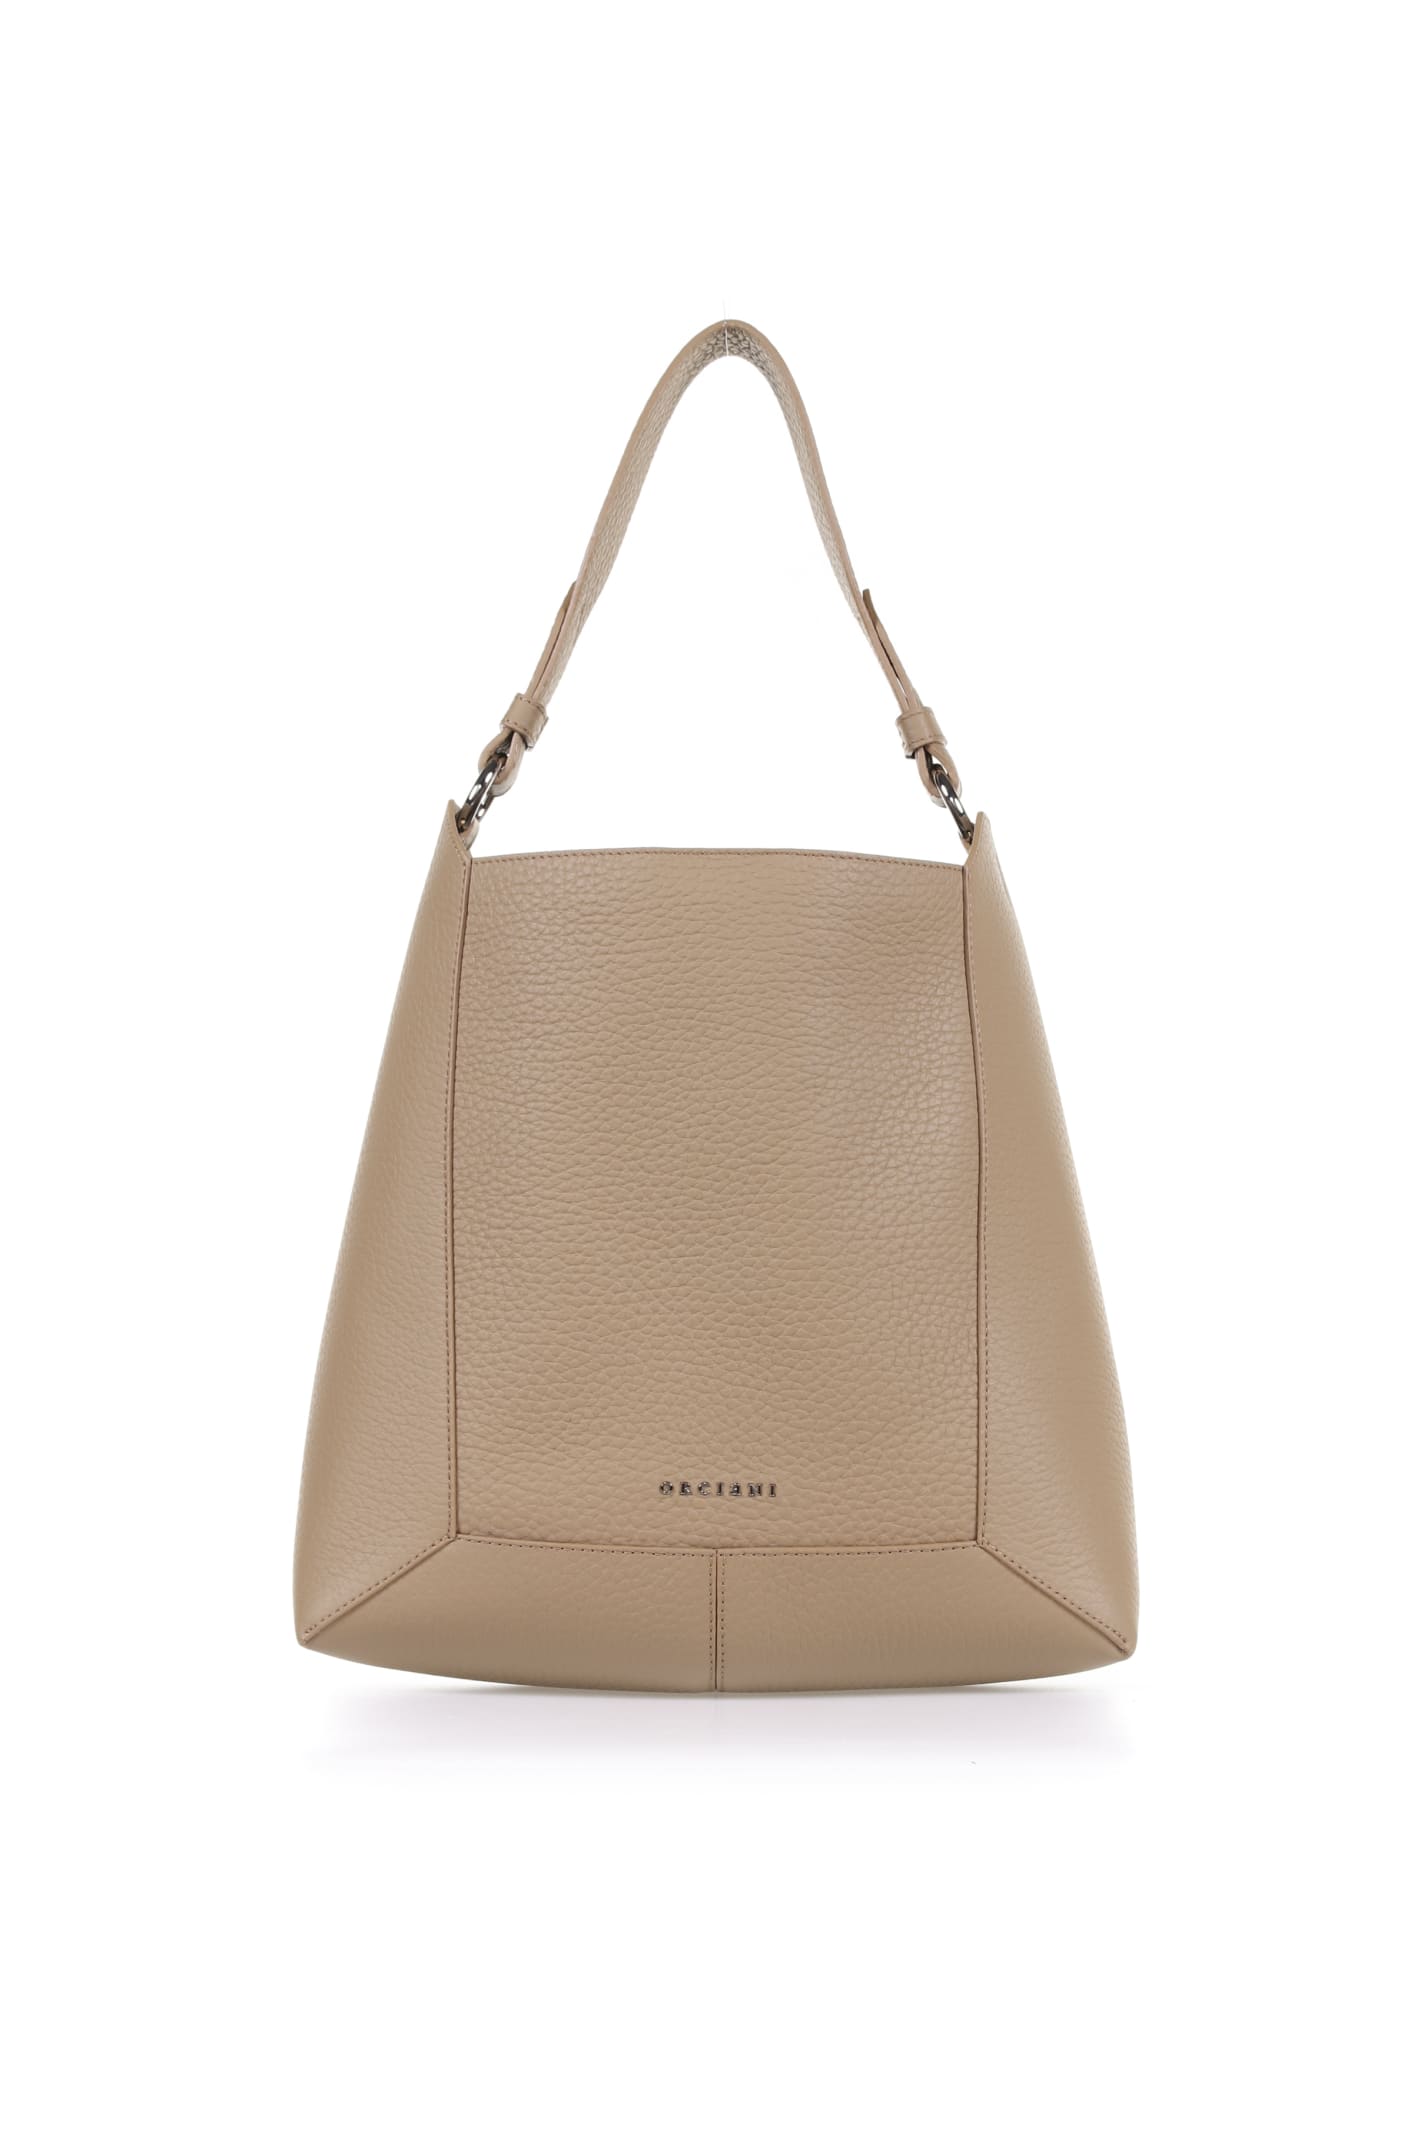 Orciani Cappuccino Leather Bag